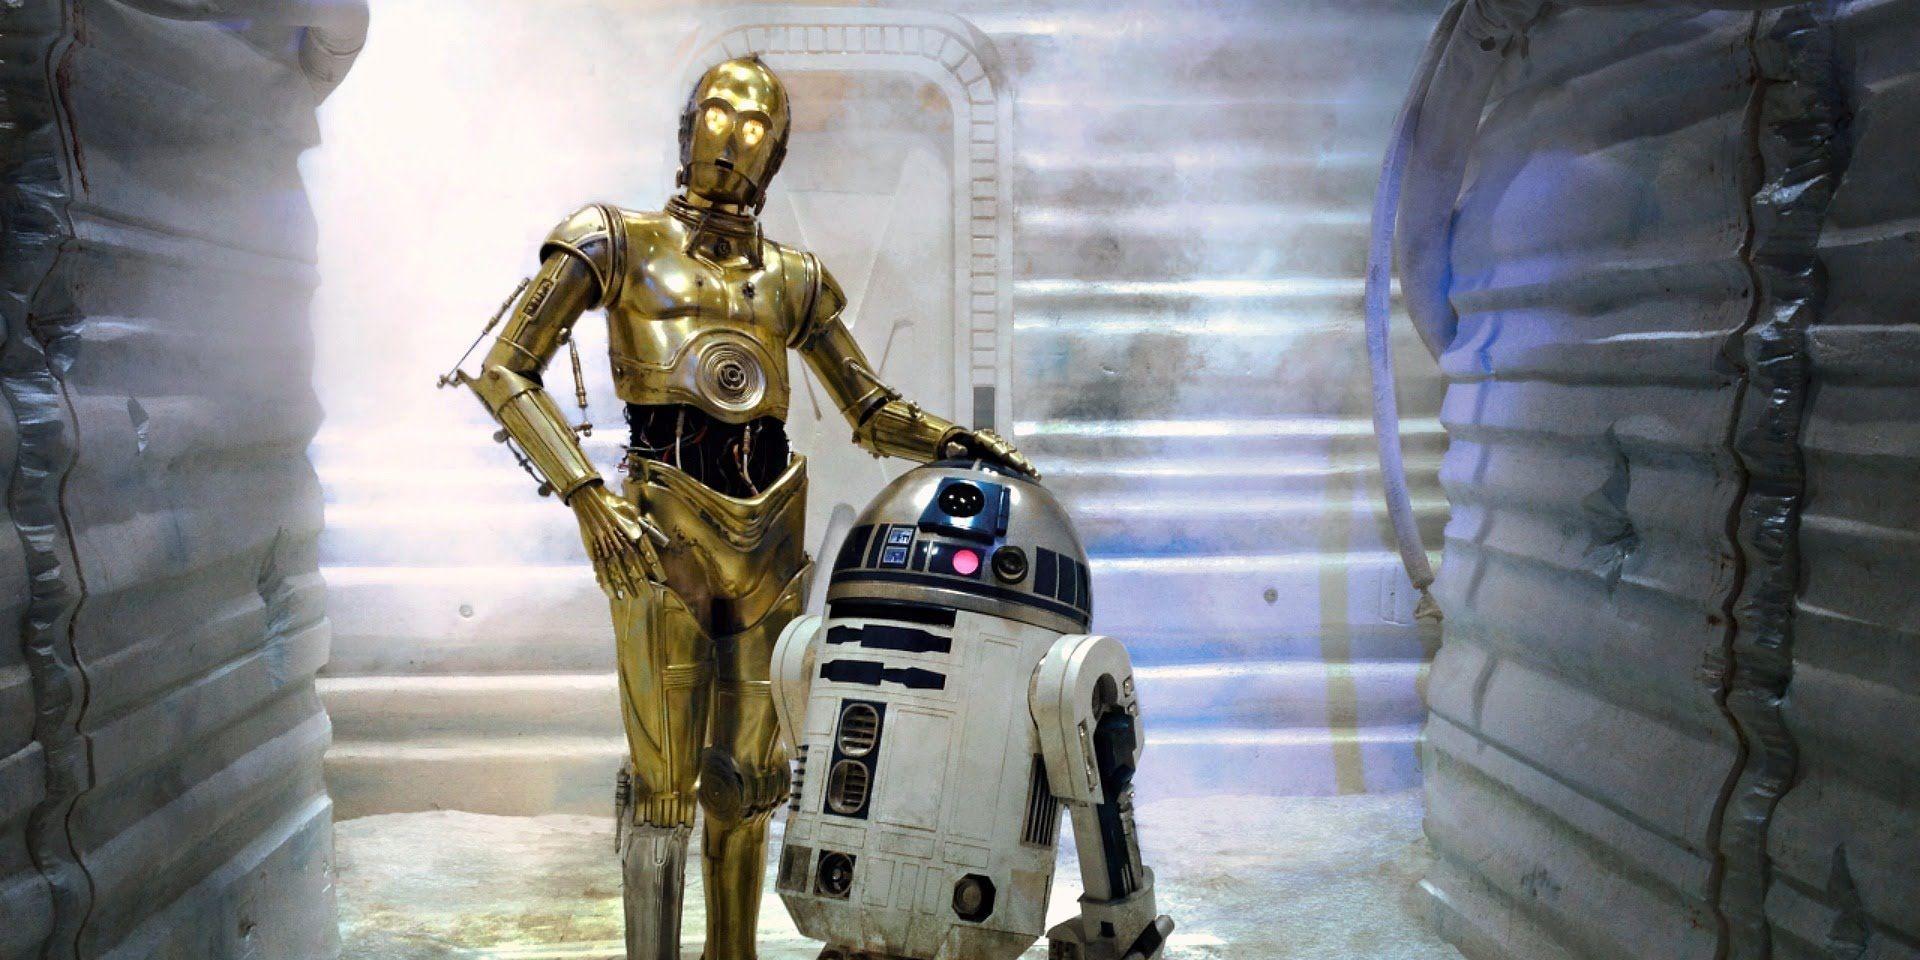 R2-D2 and C-3P0 in Star Wars